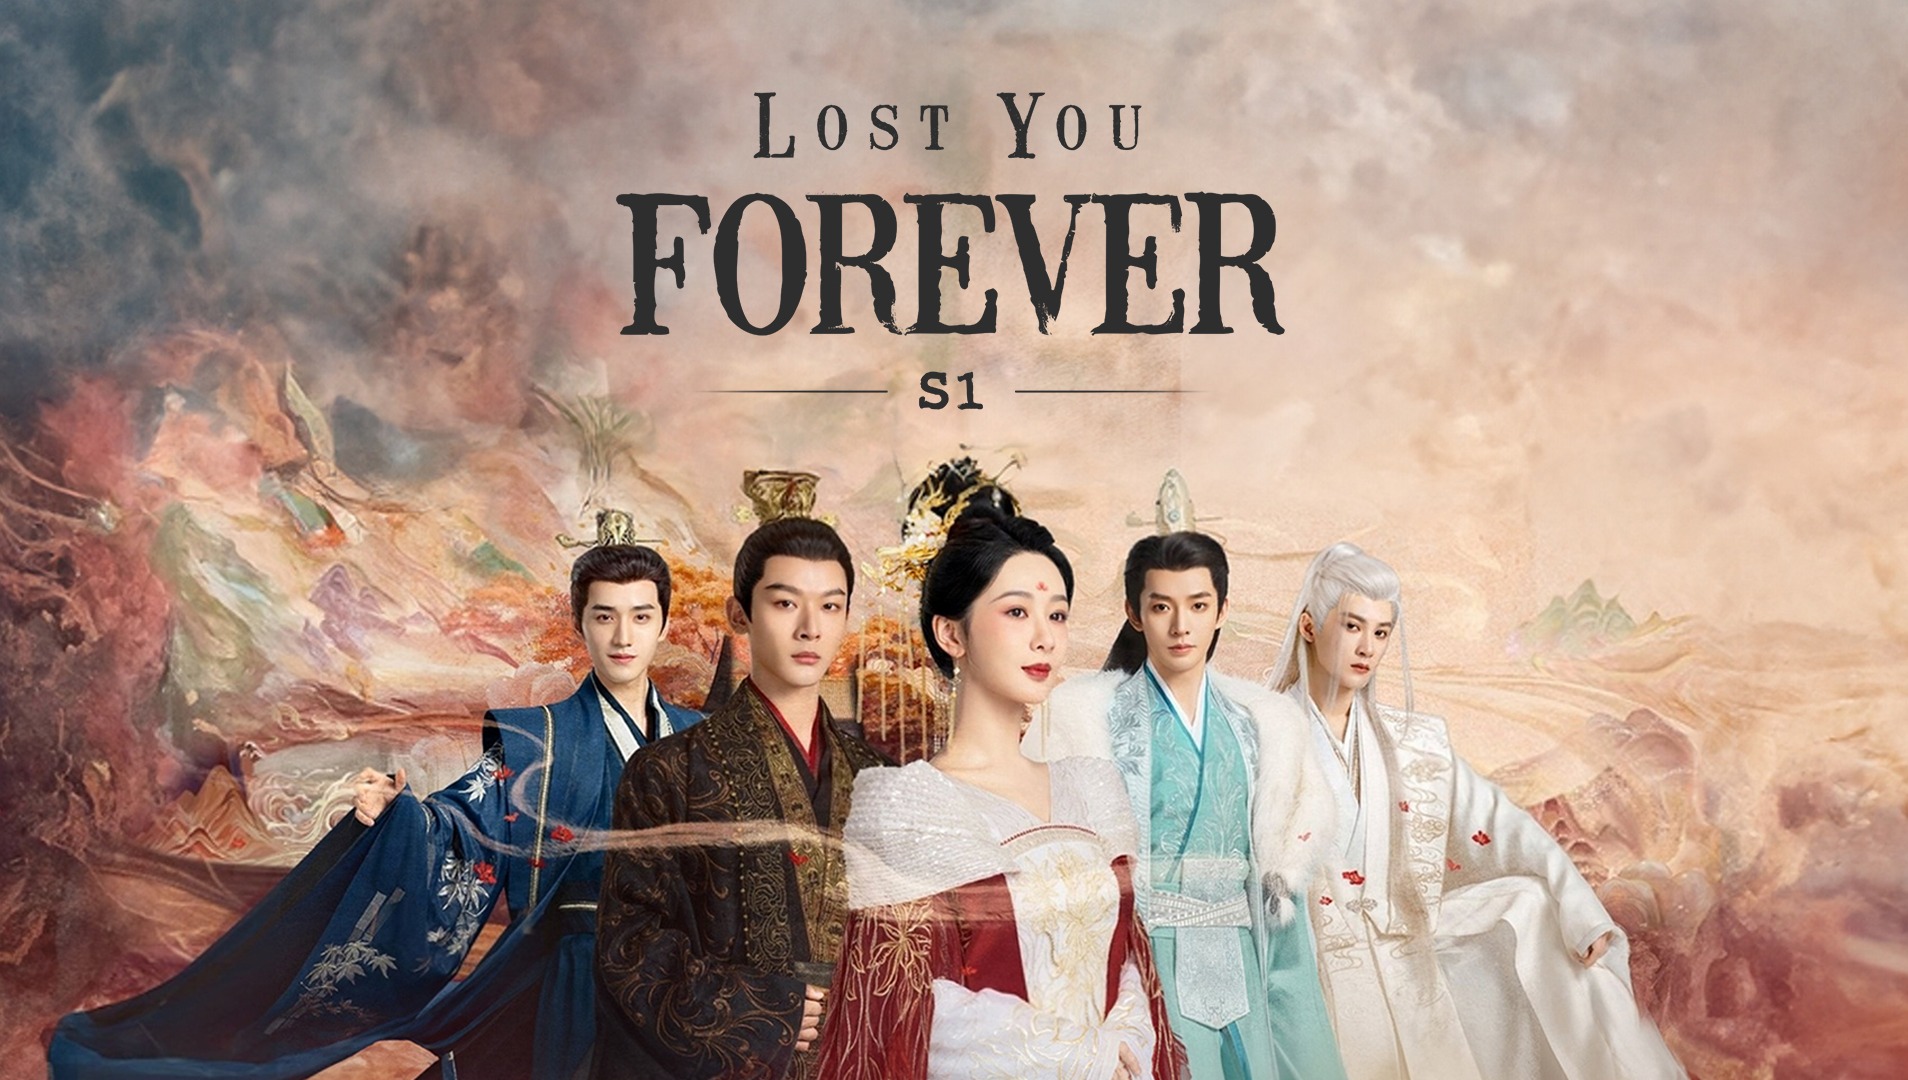 Lost You Forever S1